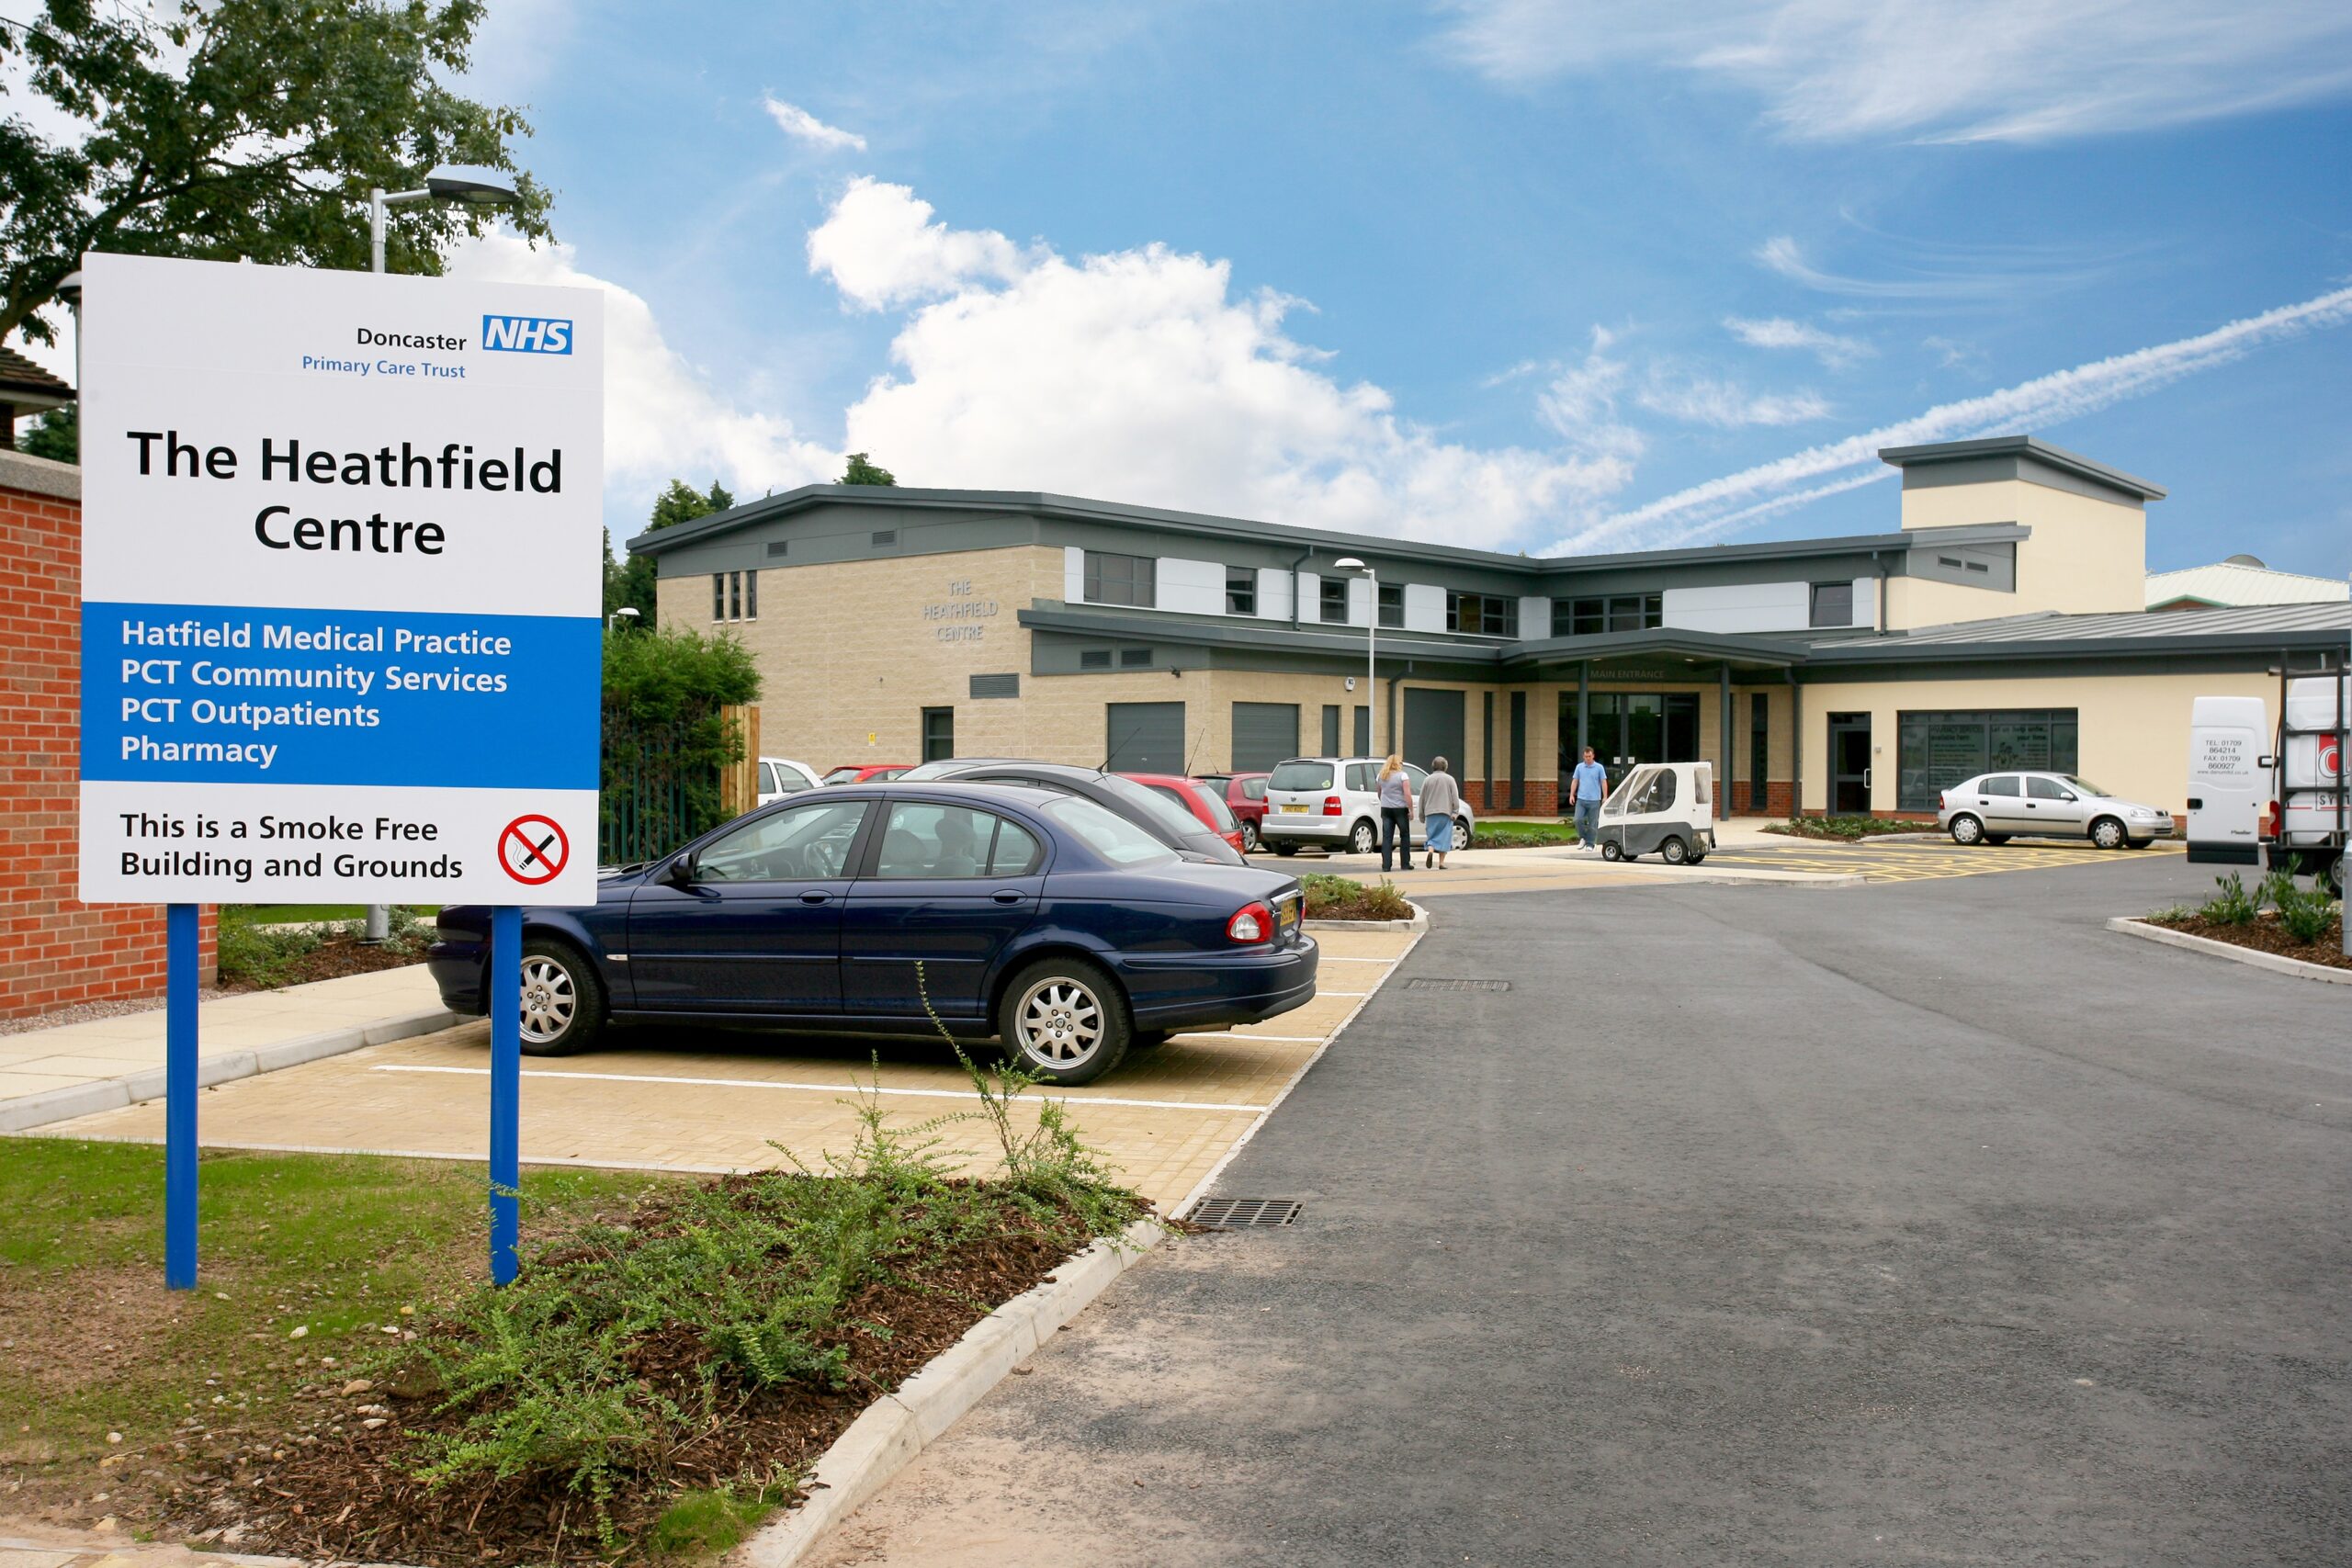 An outside view of Heathfield Health Centre in Doncaster